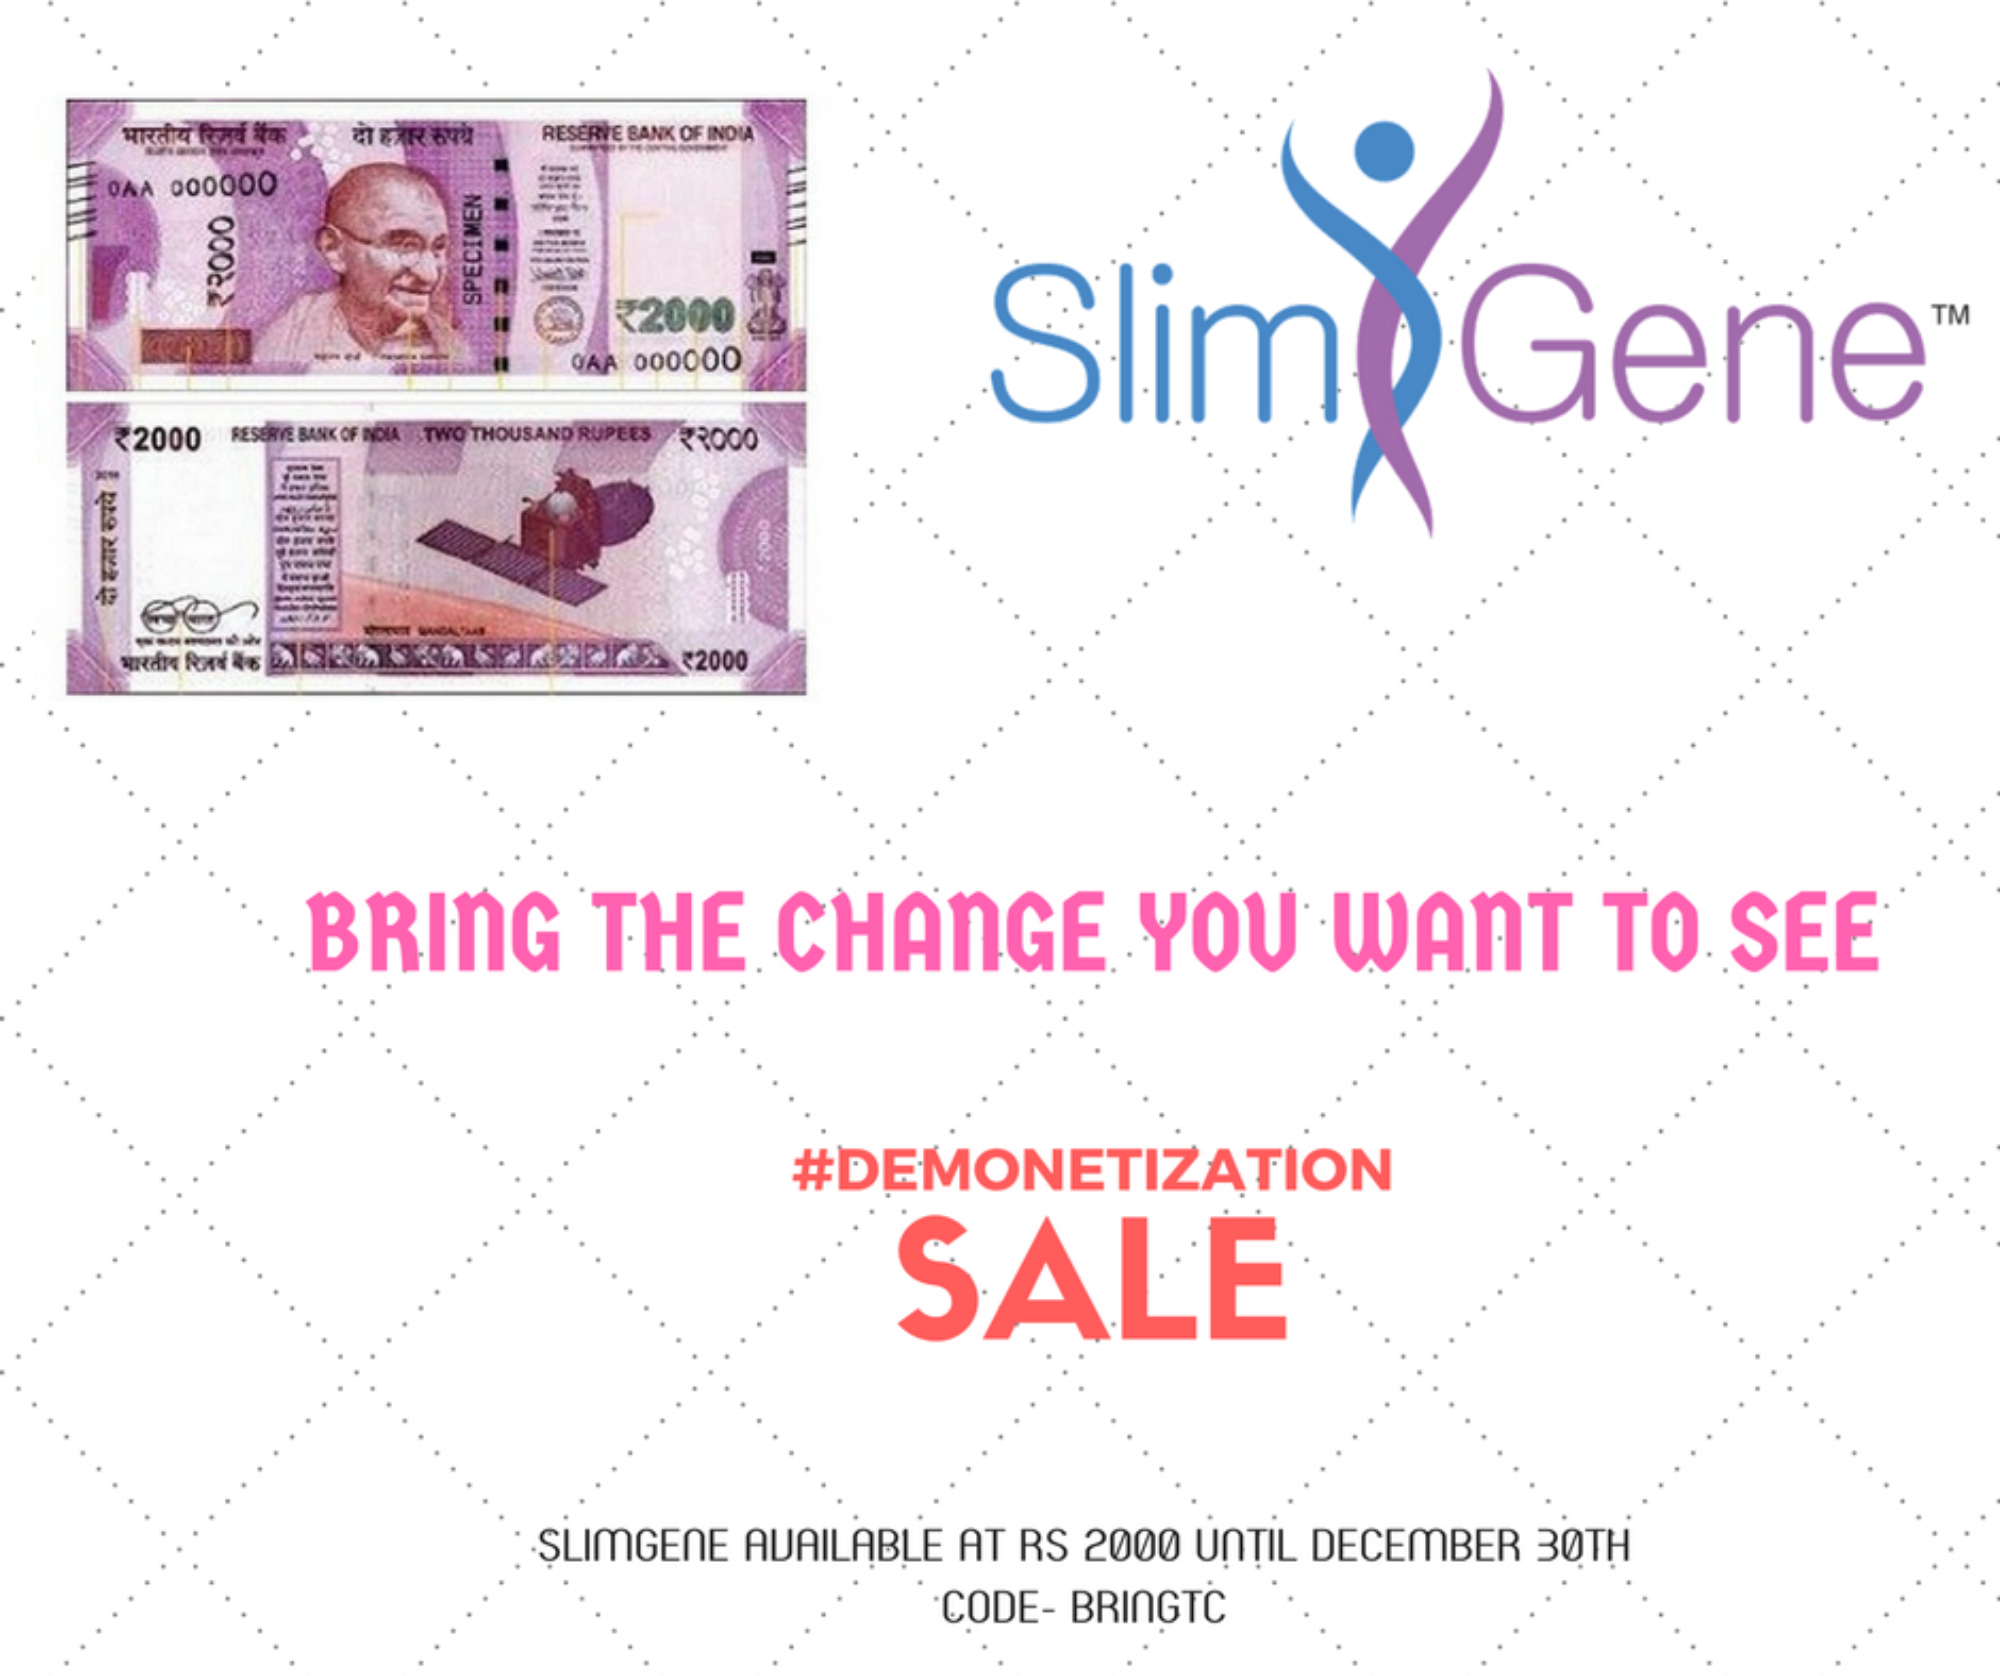 Demonetization- Bring the change you want to see